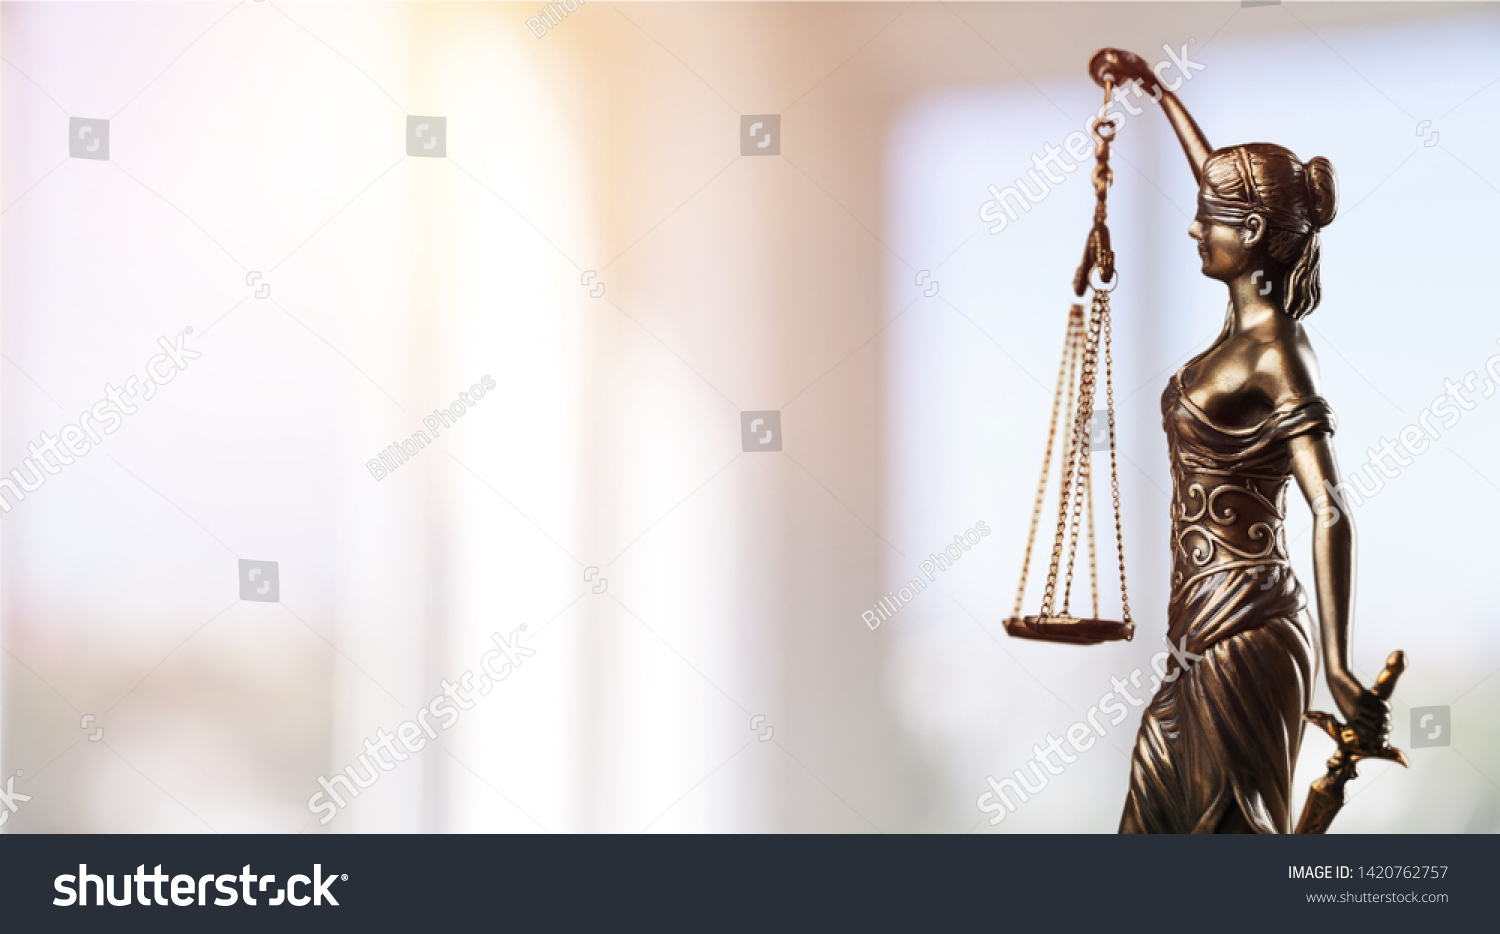 Symbol of law, Themis in modern hall. Justice and law in business. Legal system.
    
    - Image #1420762757